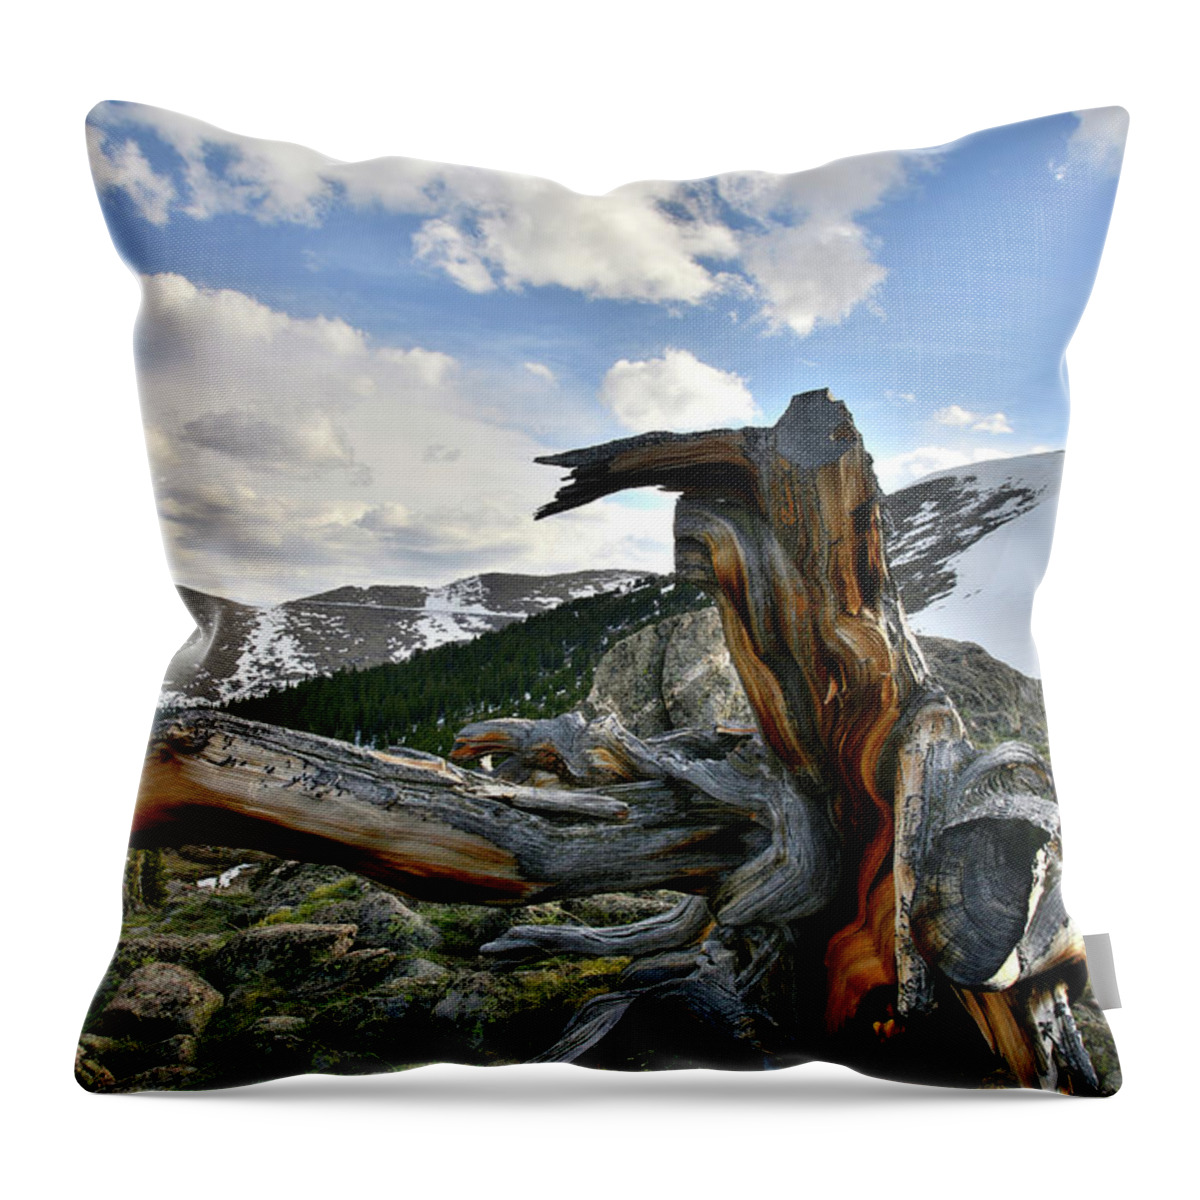 Mount Goliath Natural Area Throw Pillow featuring the photograph Mt. Evans Bristlecone Pine by Ray Mathis